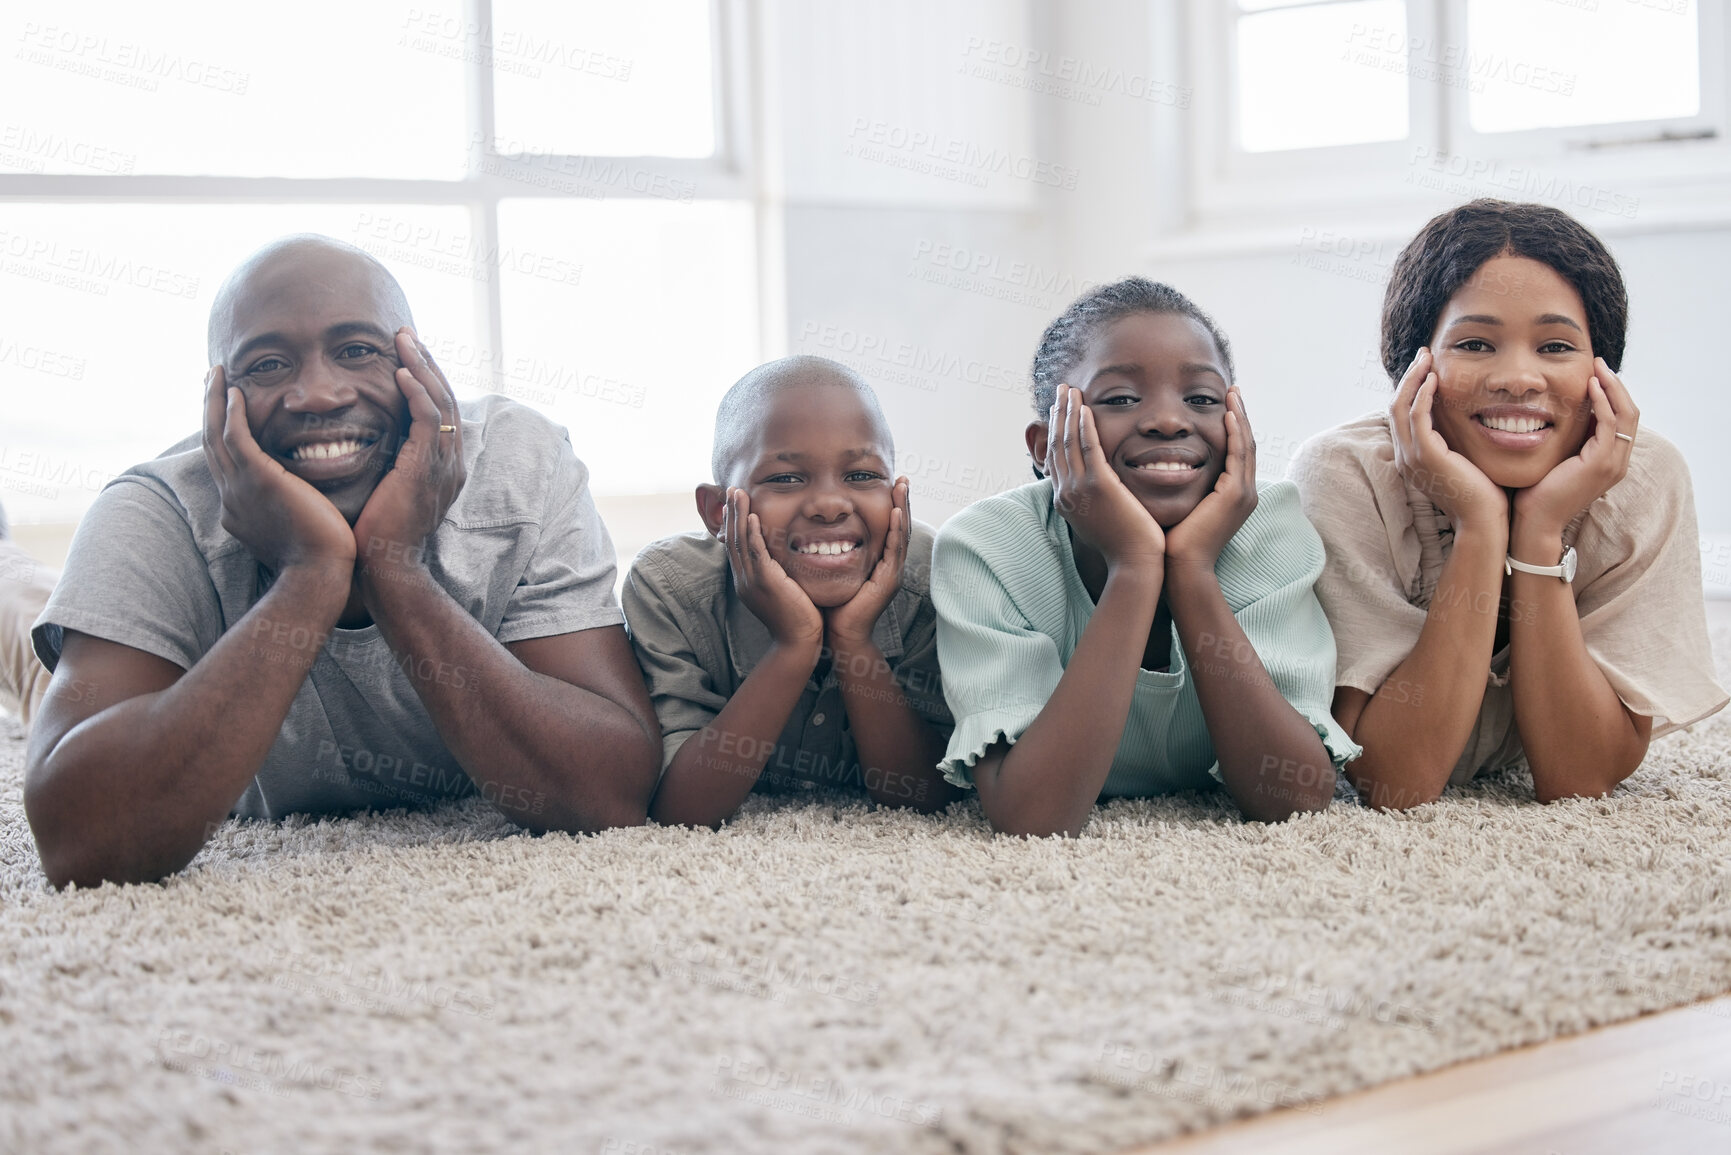 Buy stock photo Shot of a family laying on the floor and bonding at home